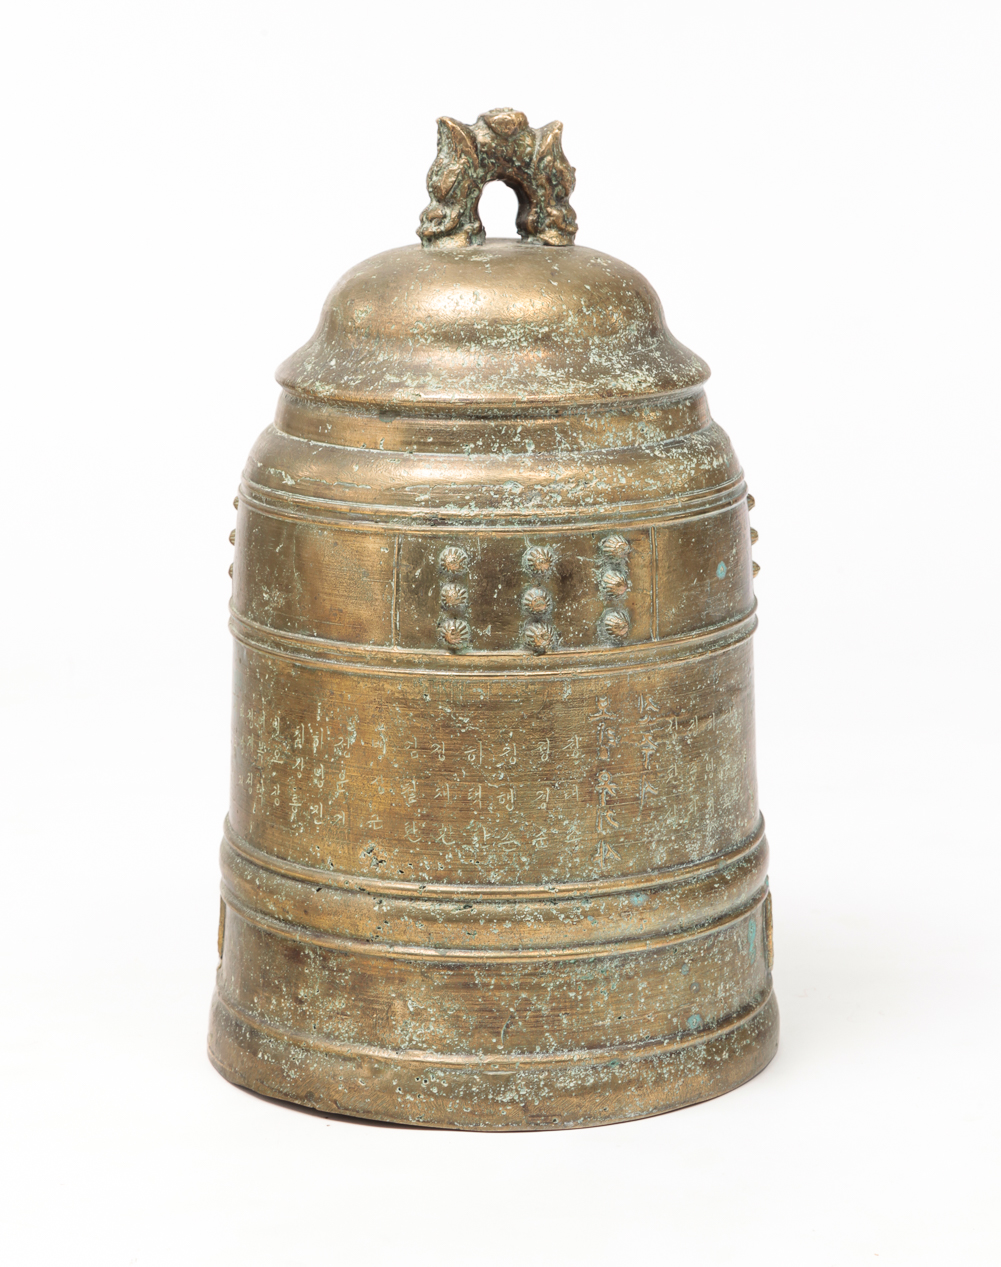 KOREAN BRASS TEMPLE BELL. Early 20th